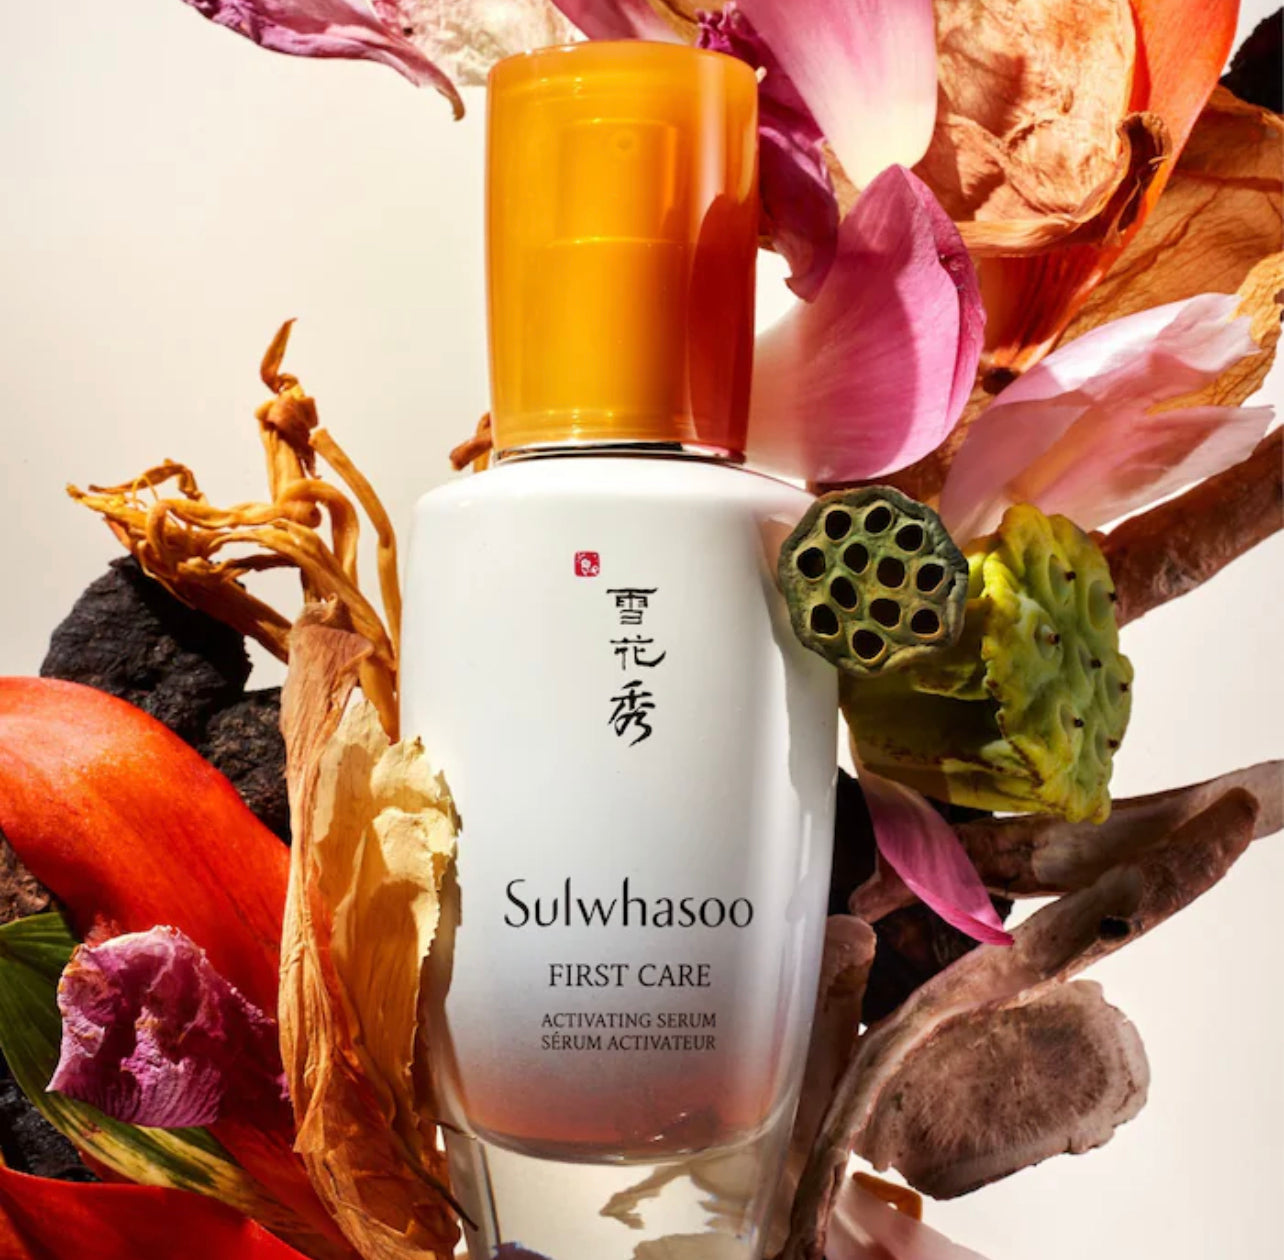 SULWHASOO, ANTI-AGING FIRST CARE ACTIVATING SERUM